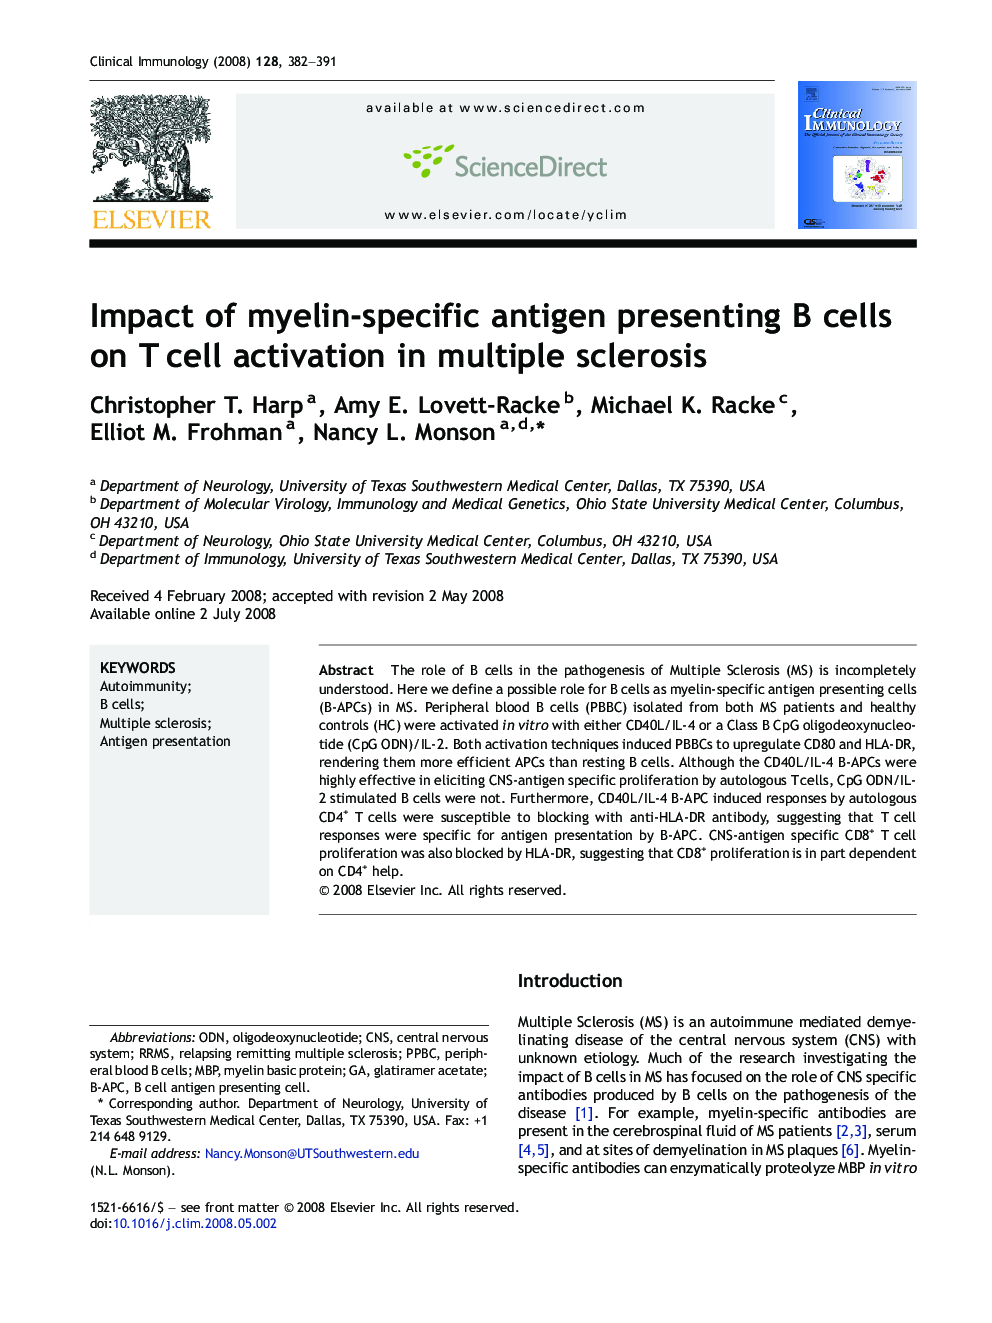 Impact of myelin-specific antigen presenting B cells on T cell activation in multiple sclerosis